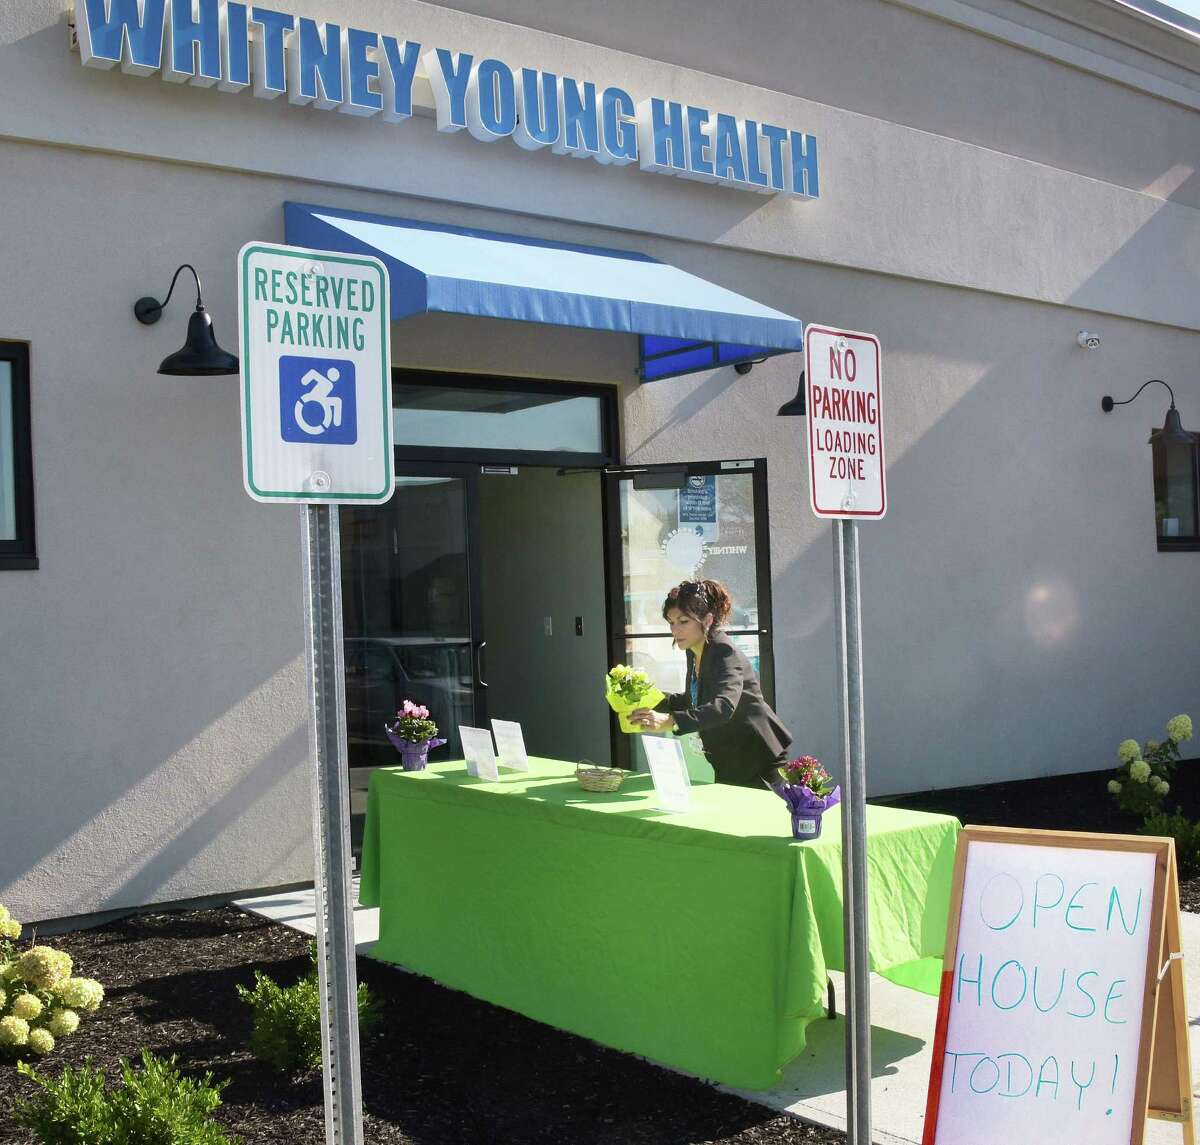 Whitney Young Health readies to unveil their newest facility, the Watervliet Health Center Tuesday Aug. 9, 2016 in Watervliet, NY. (John Carl D'Annibale / Times Union)